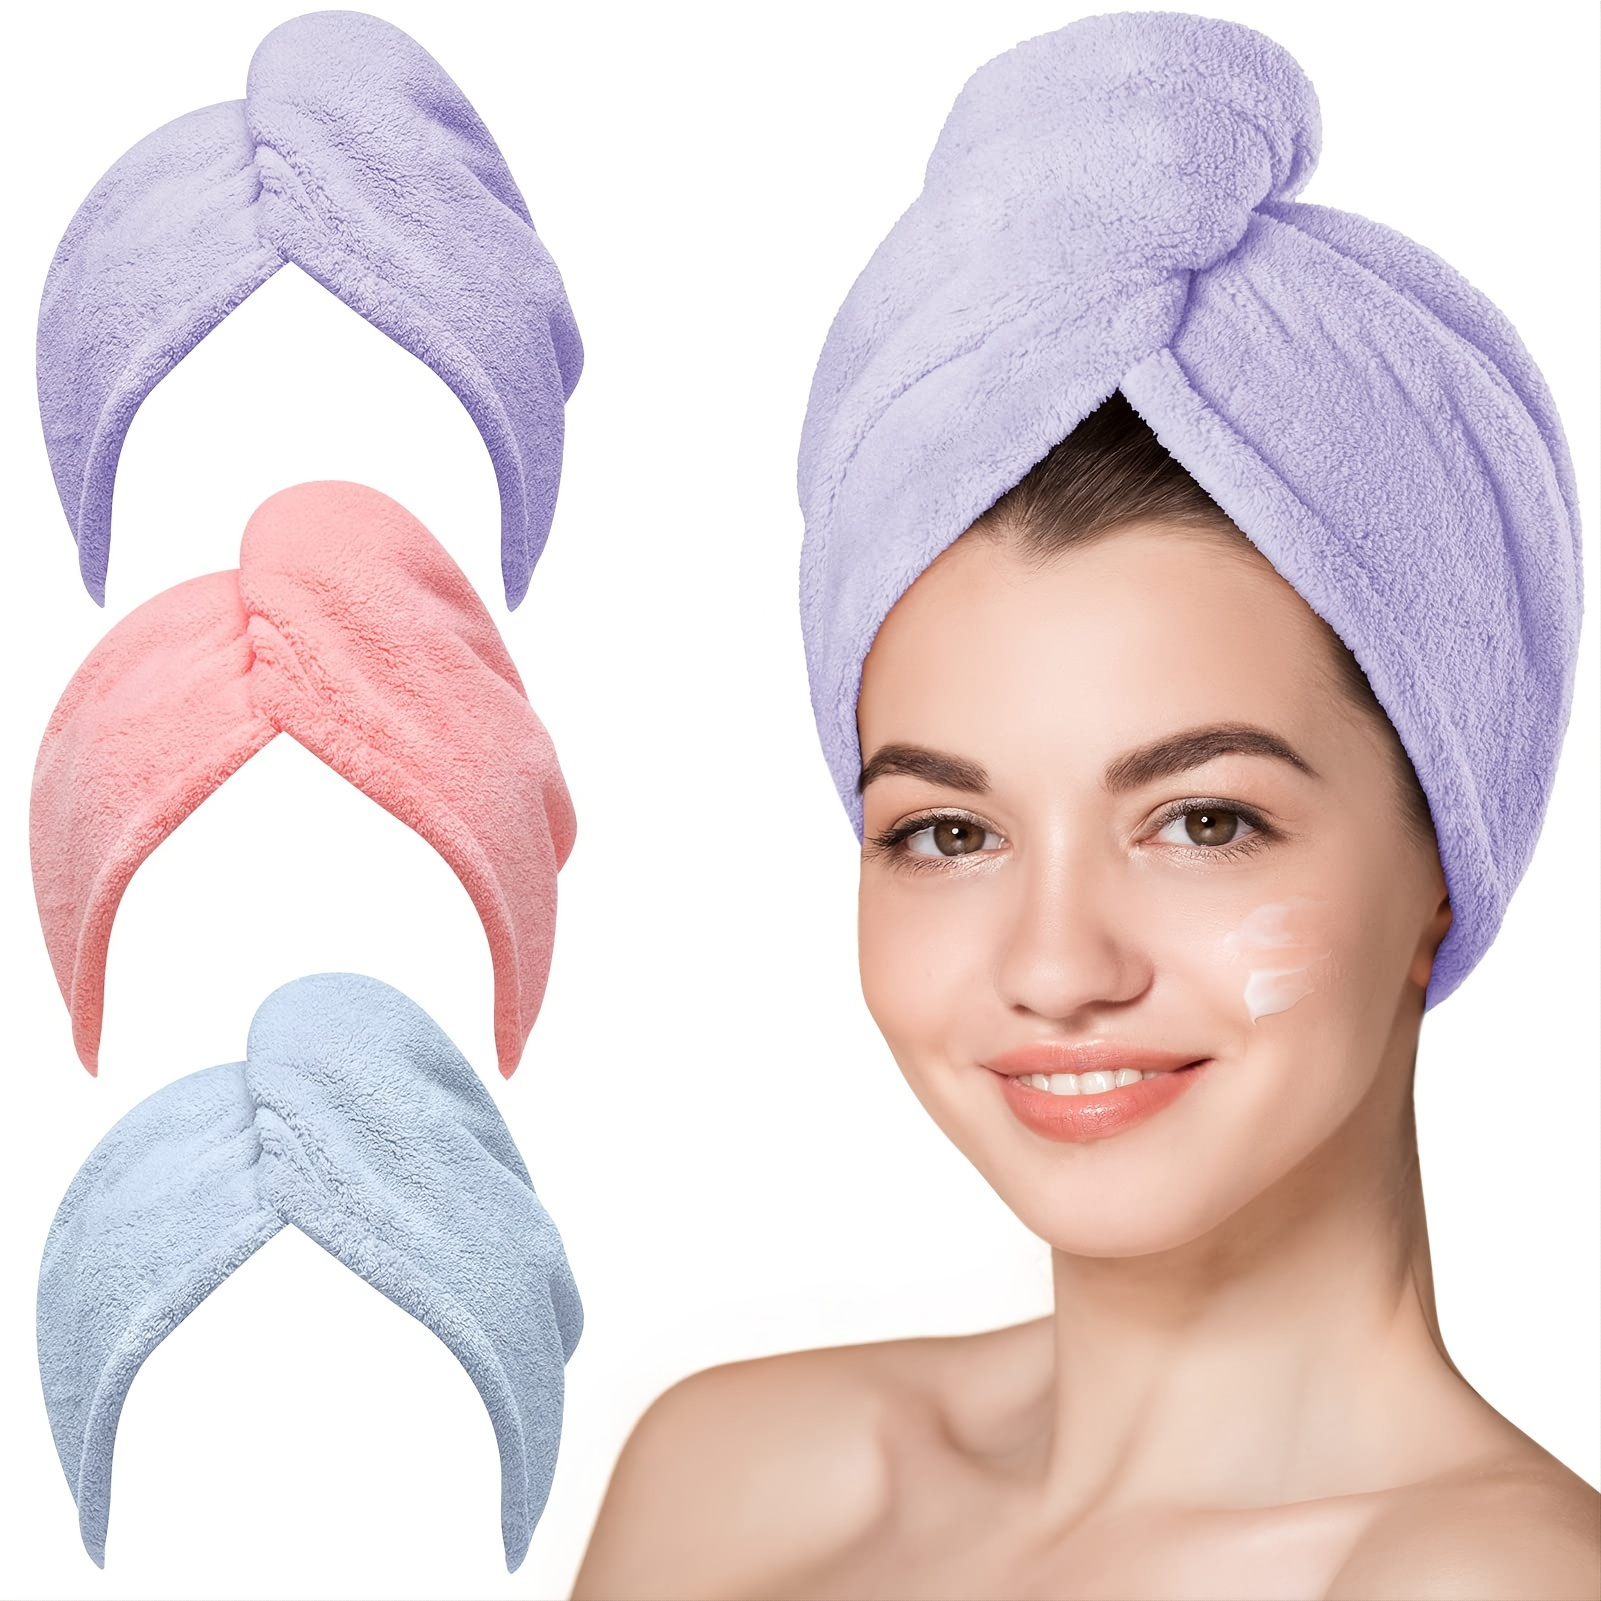 

1pc Super Absorbent Fast Drying Hair Towel With Button - Soft And Water-absorbing Microfiber Wrap For Women - Anti-frizz And Anti-static - Perfect For Bathroom Accessories 100% Polyester